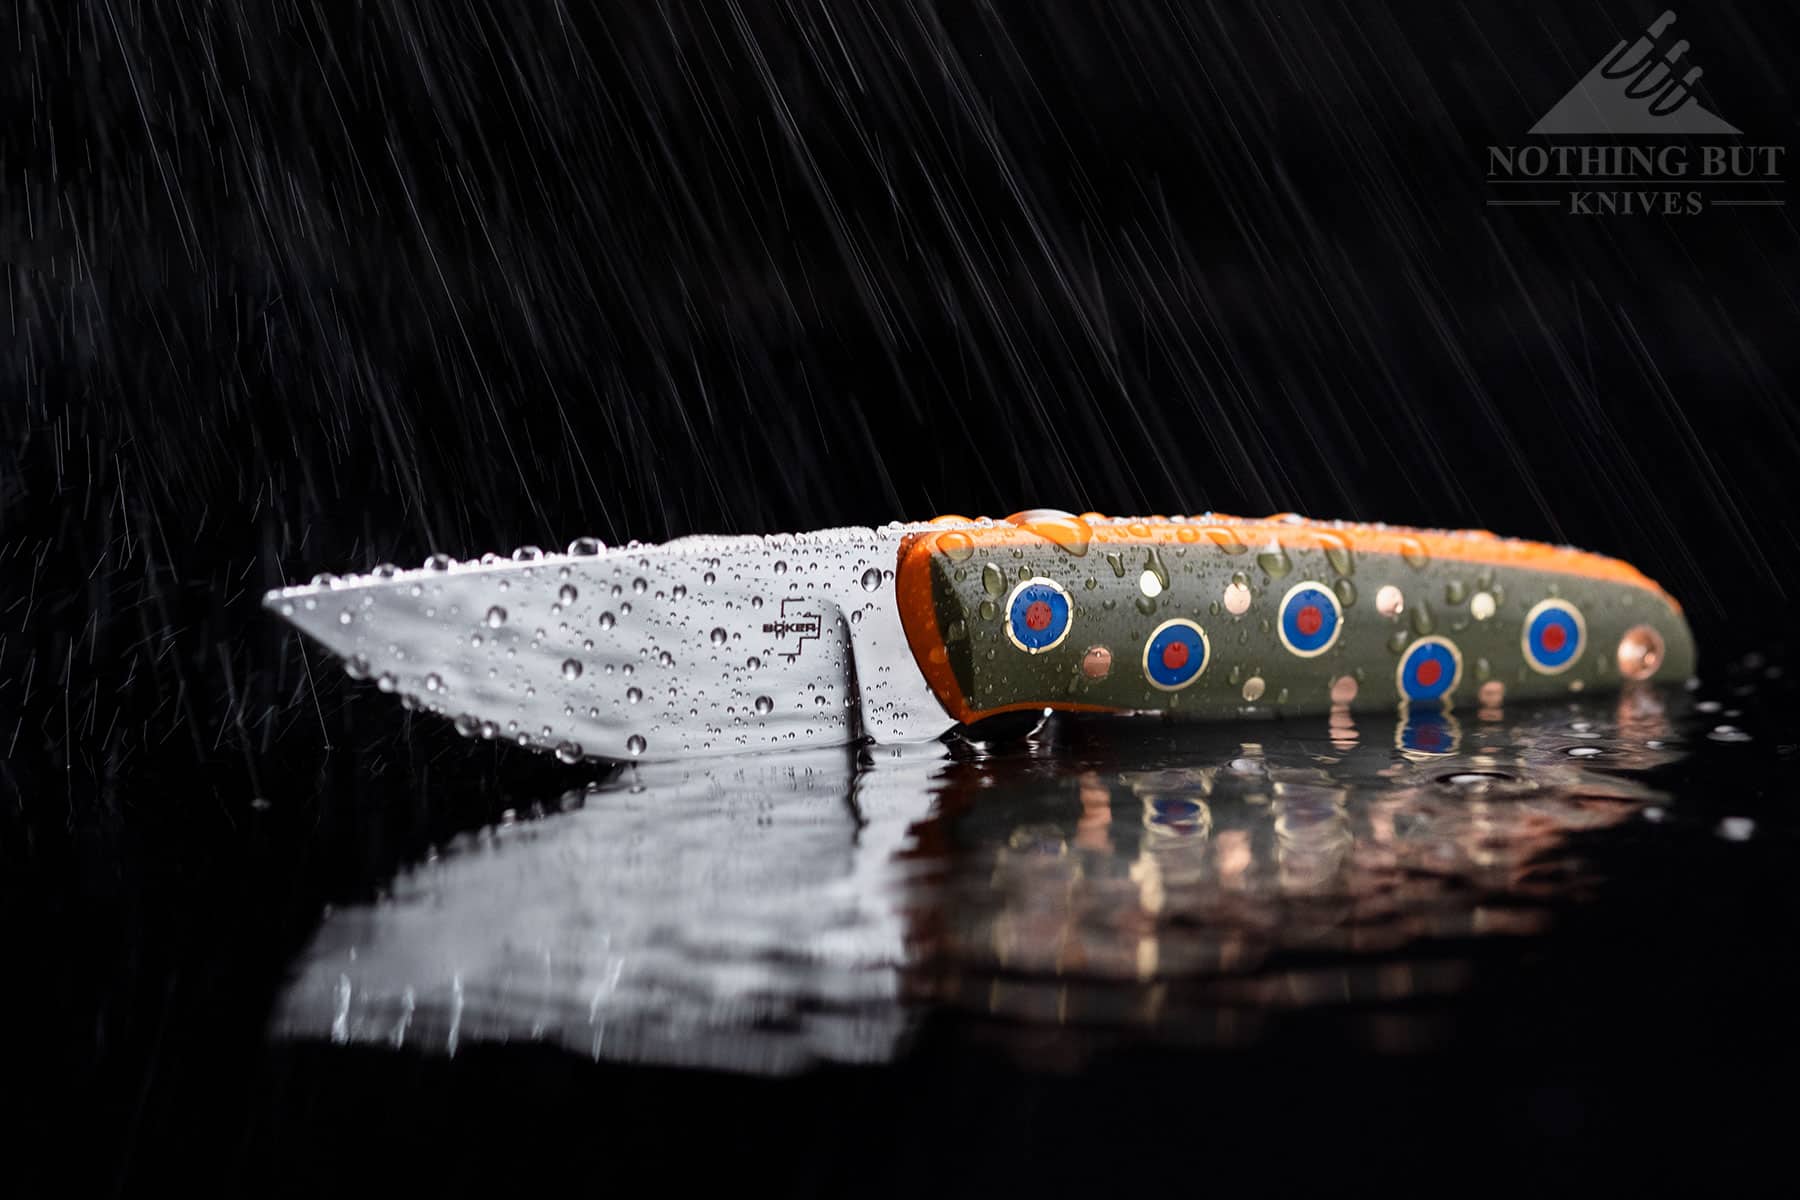 The Boker Plus The Brook fixed blade knife in water to illustrate the corrosion resistance of the steel blade.